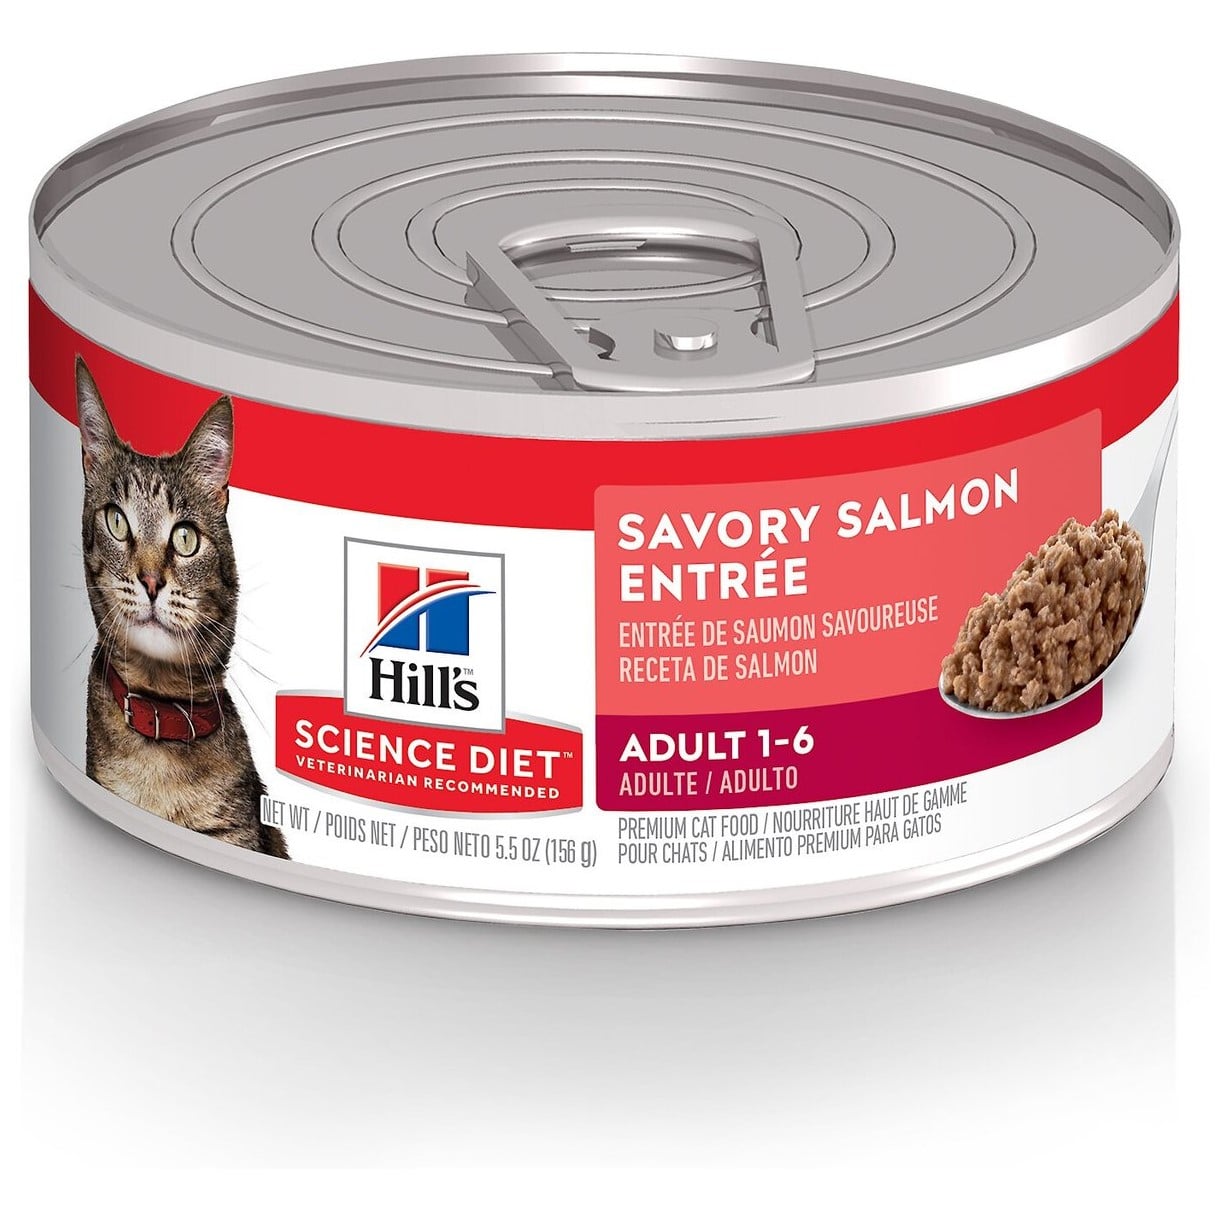 Hill's Science Diet Savory Salmon Entree, Adult Canned Cat Food